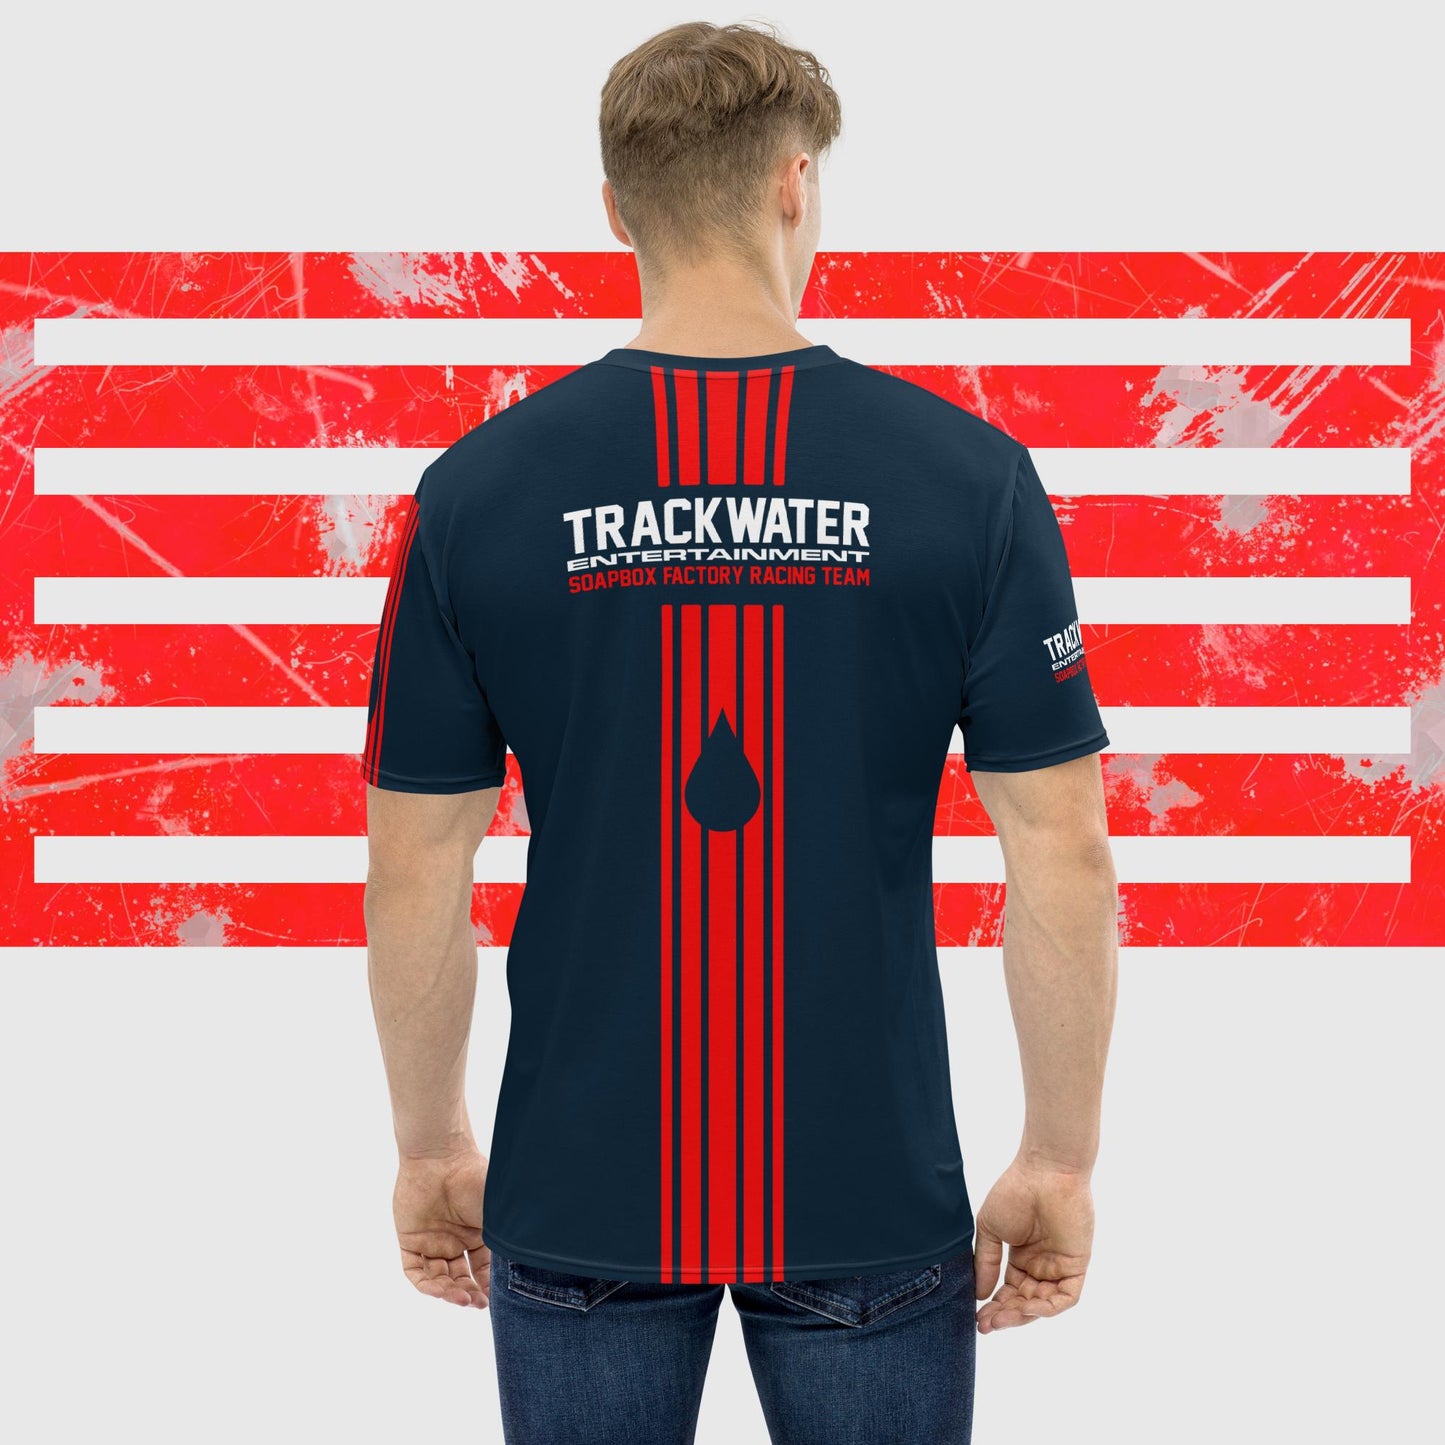 TRACKWATER SUPPORT T-Shirt